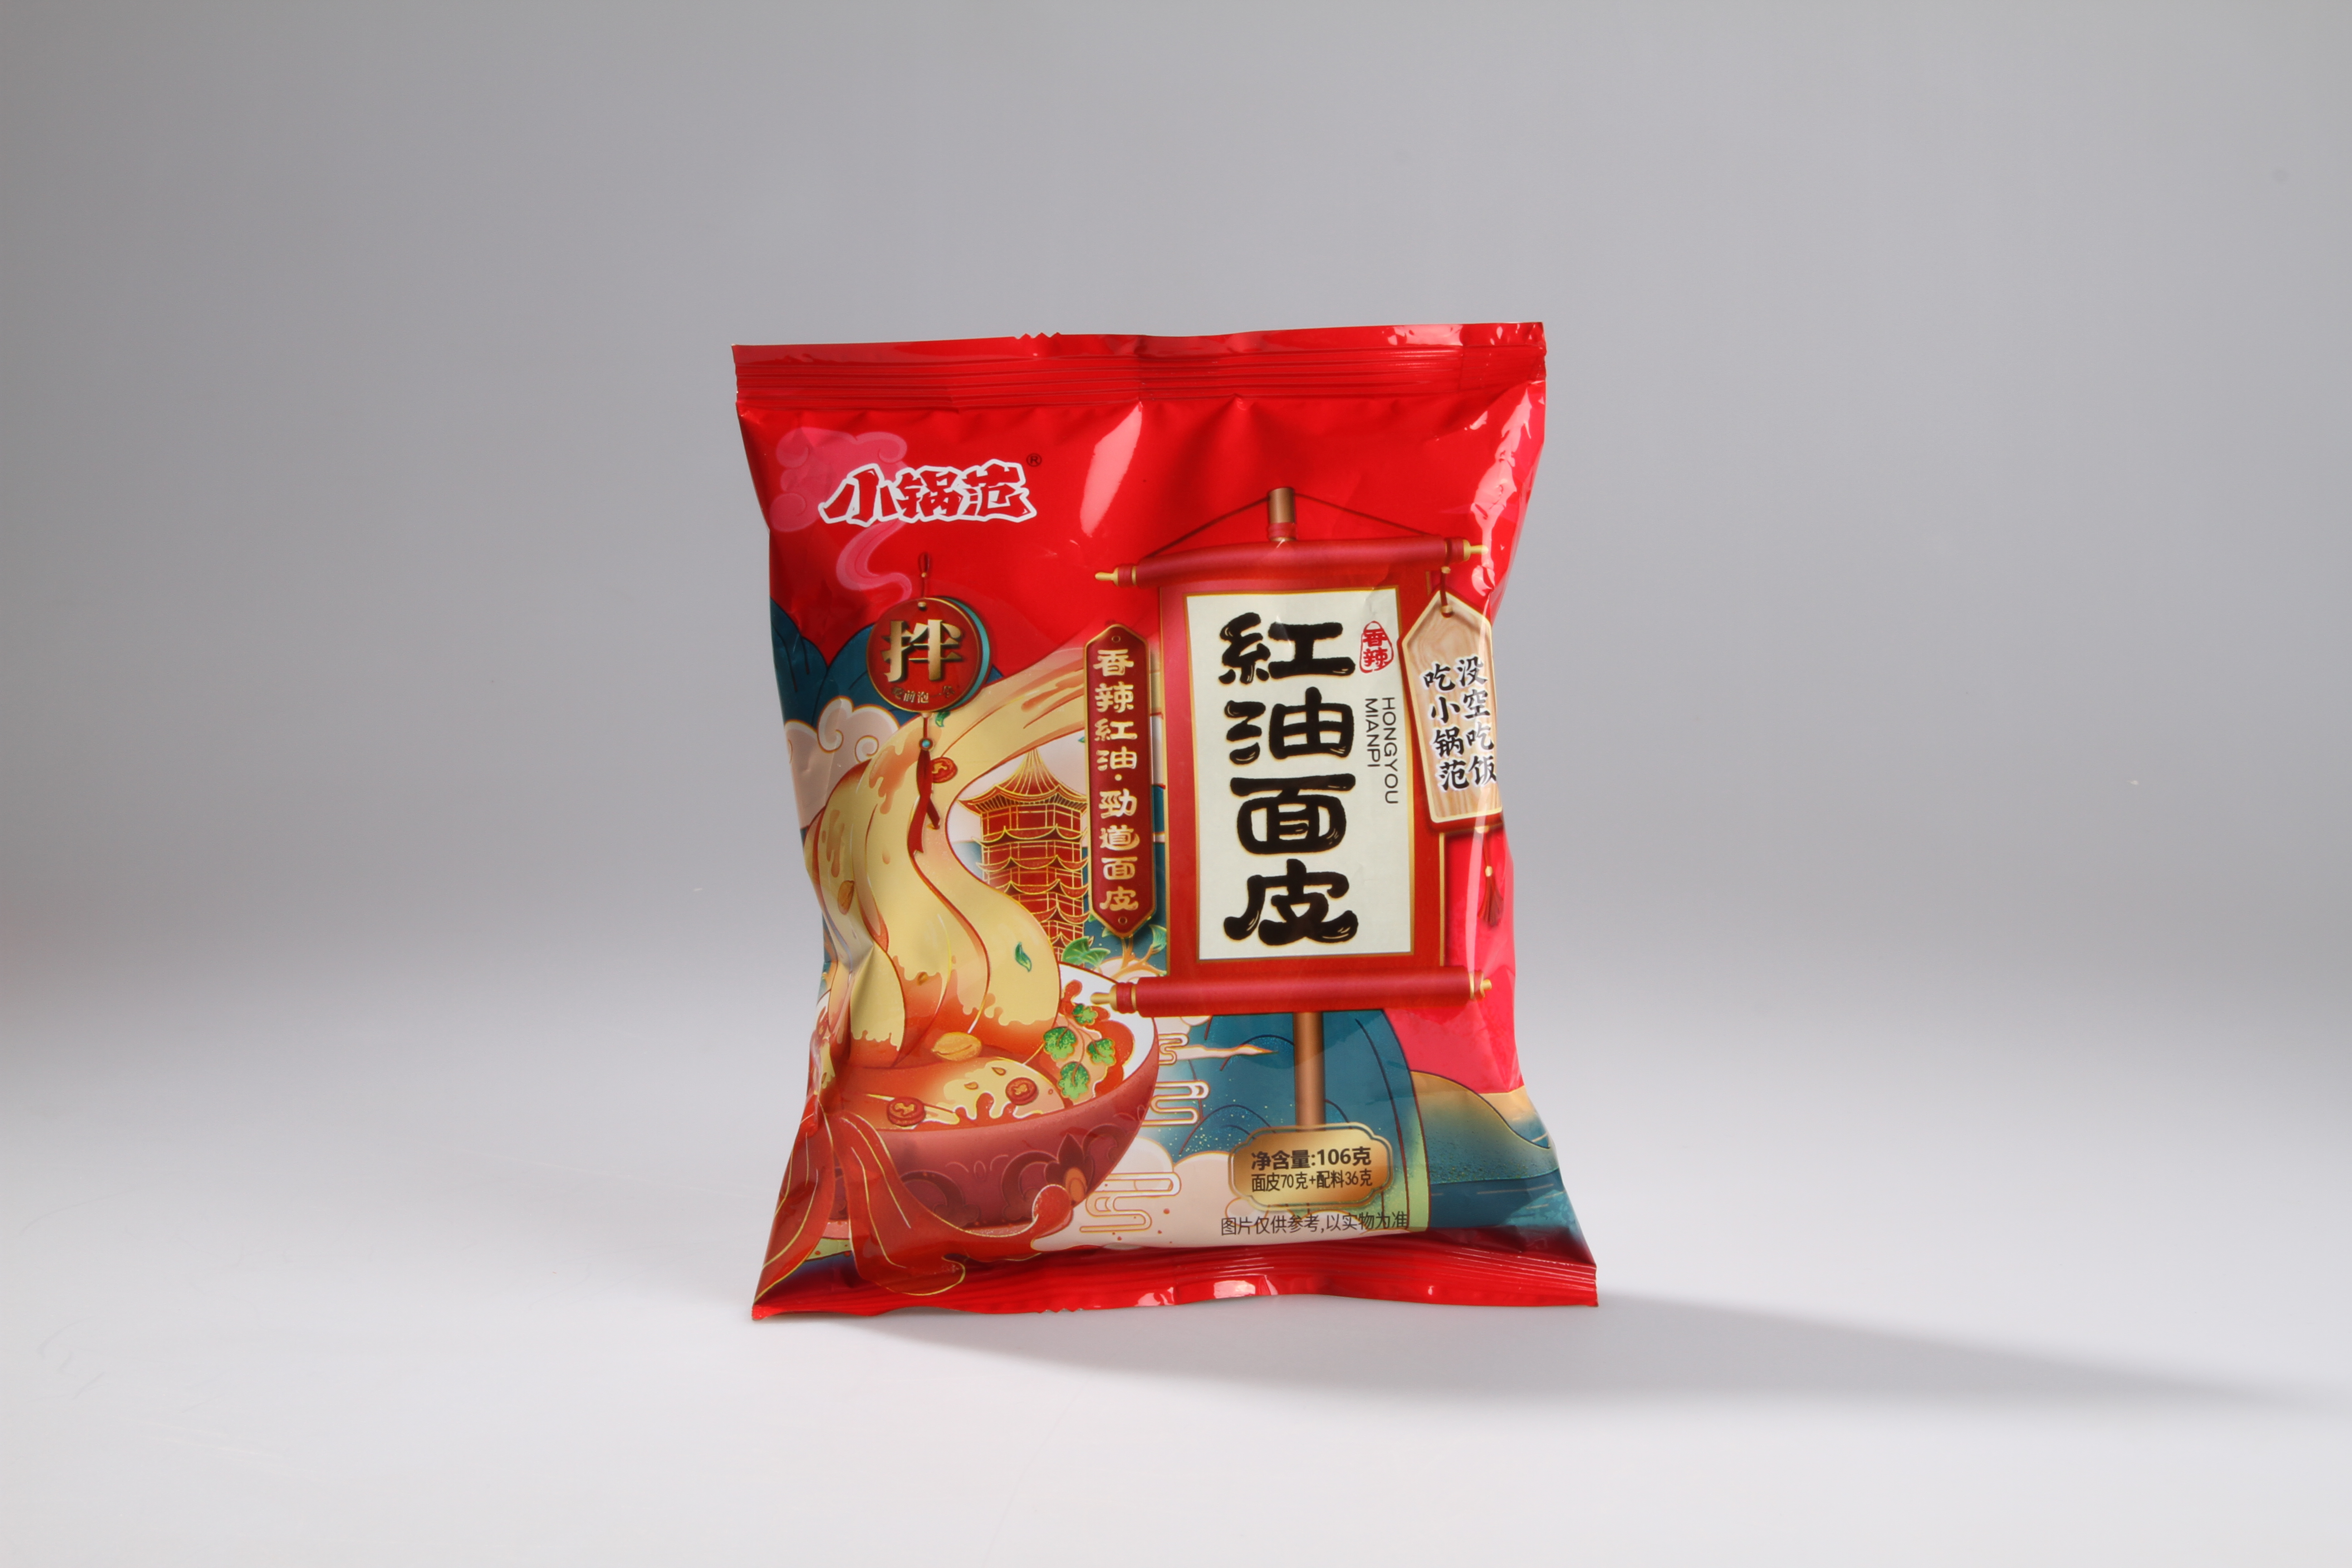 instant noodles with red oil flavor(chilli oil)